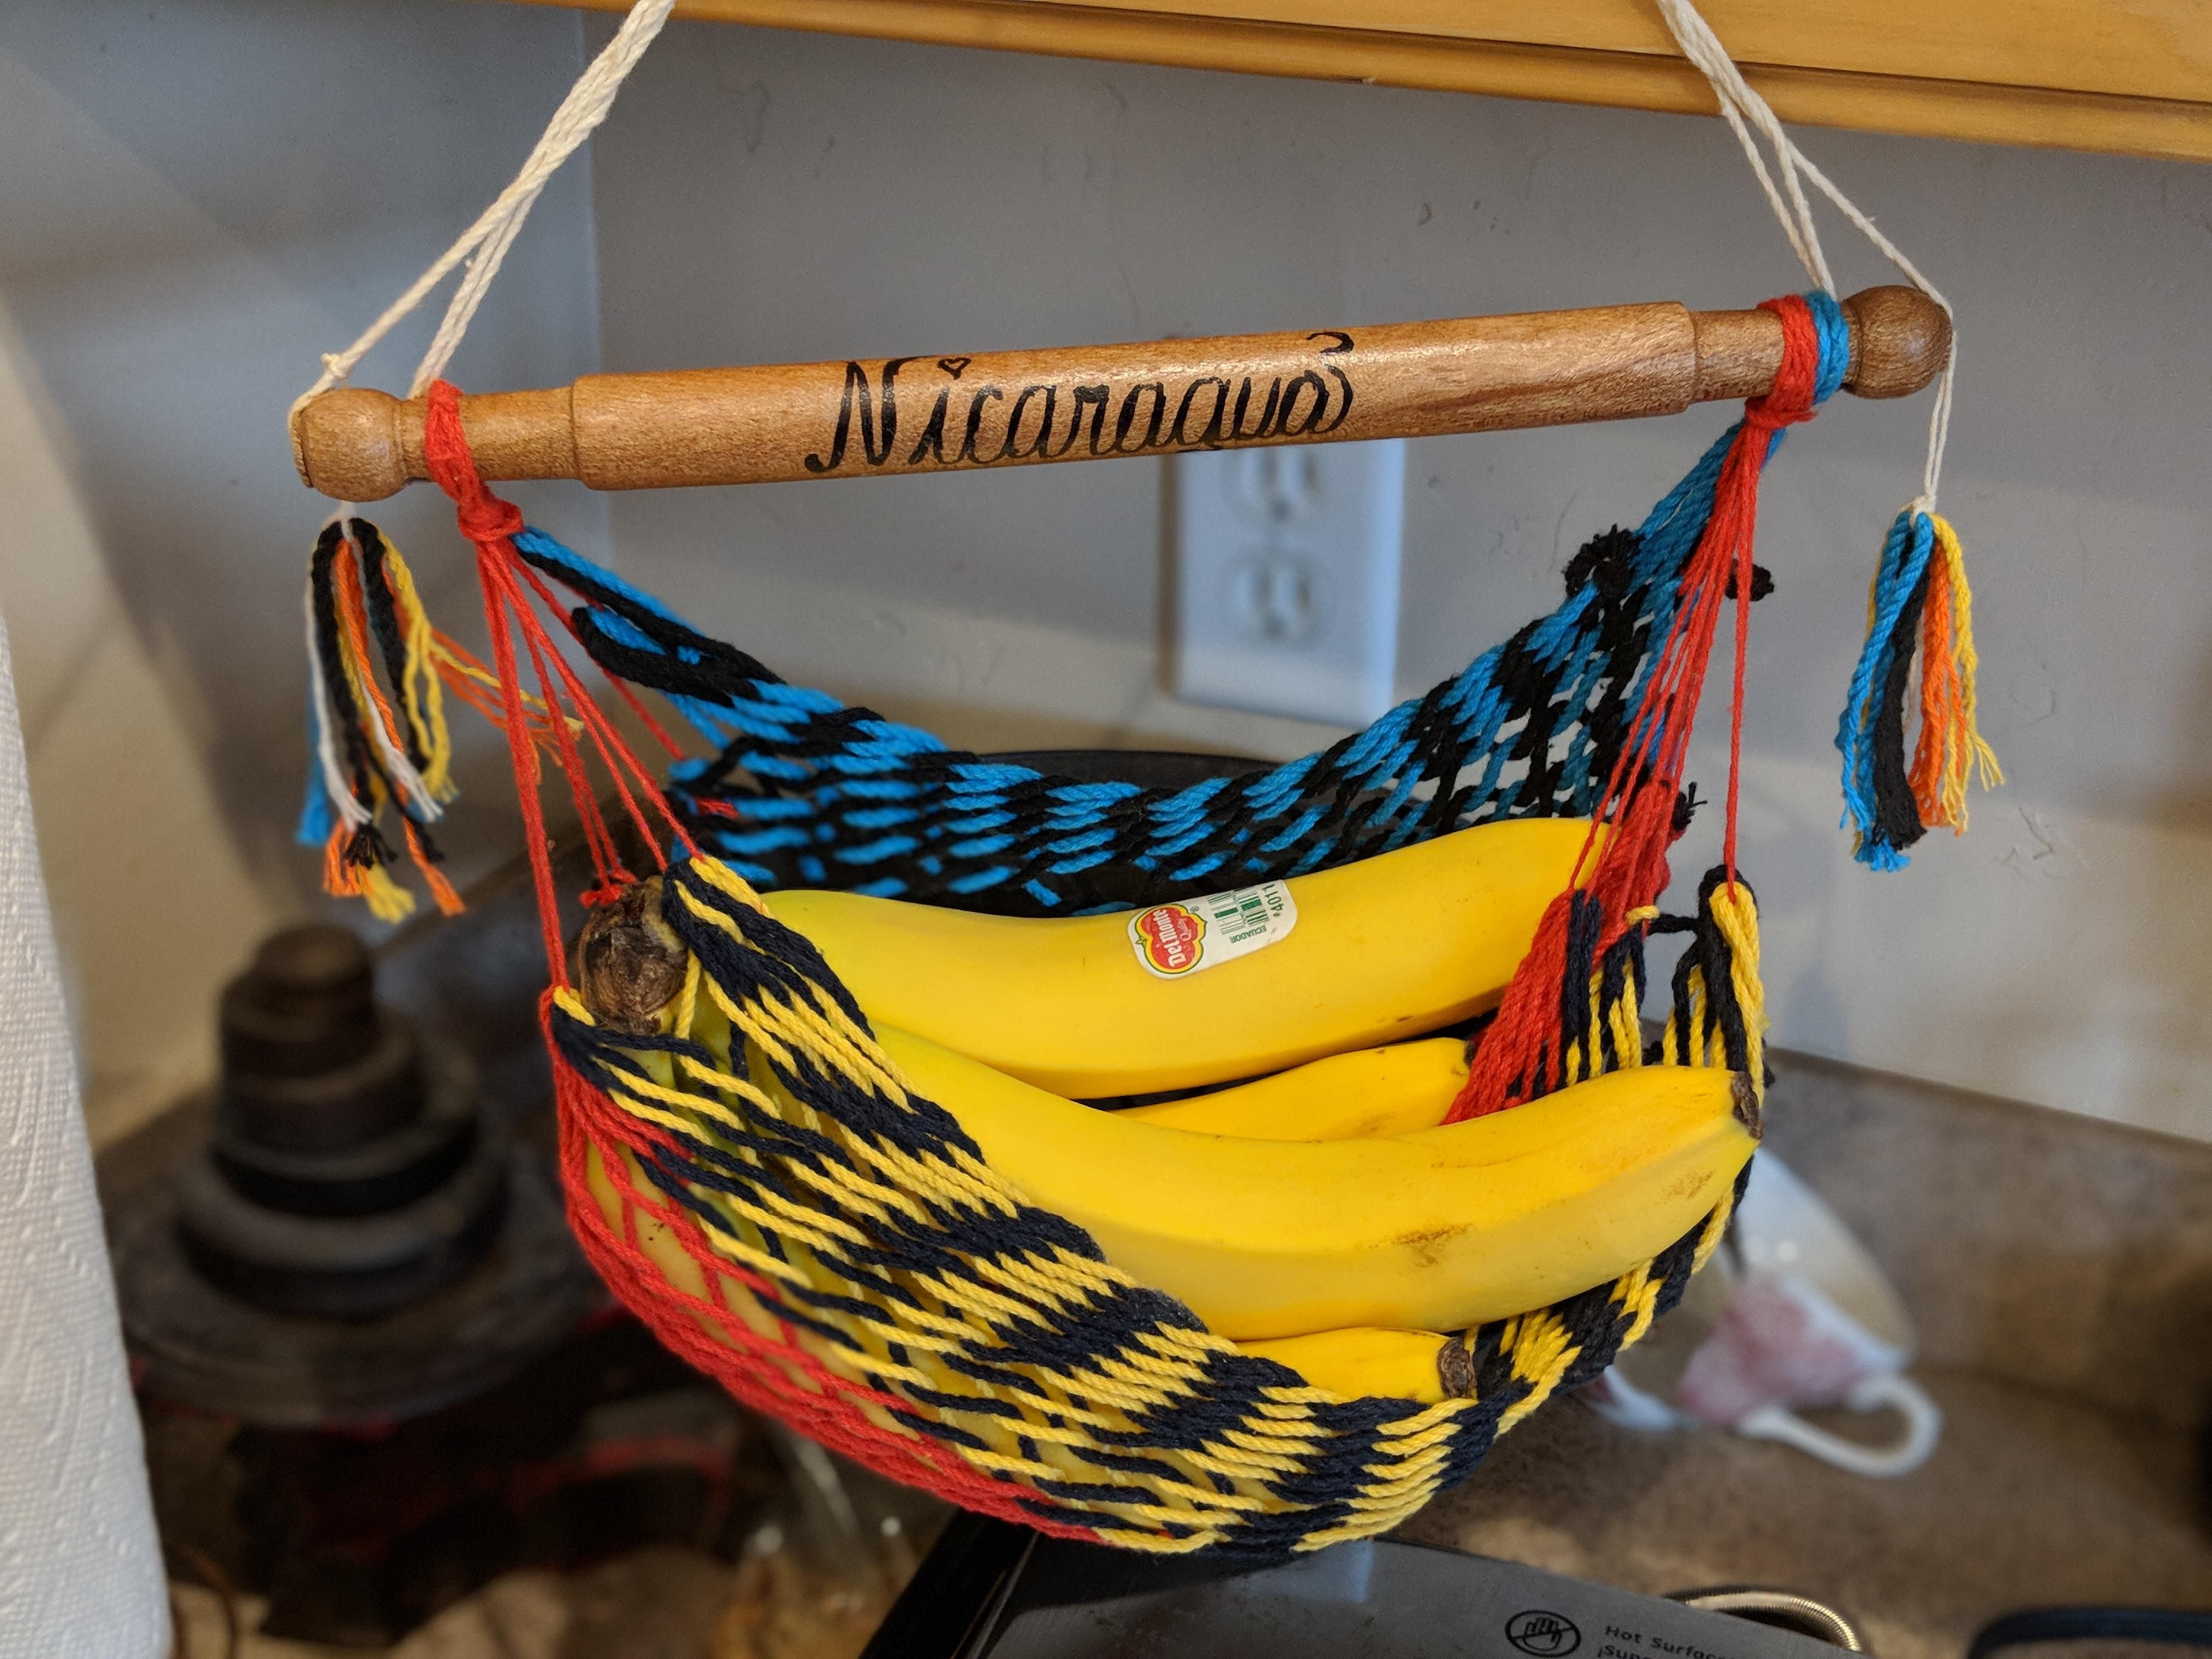 My sister brought this mini hammock home from Nicaragua. We put it to good use.